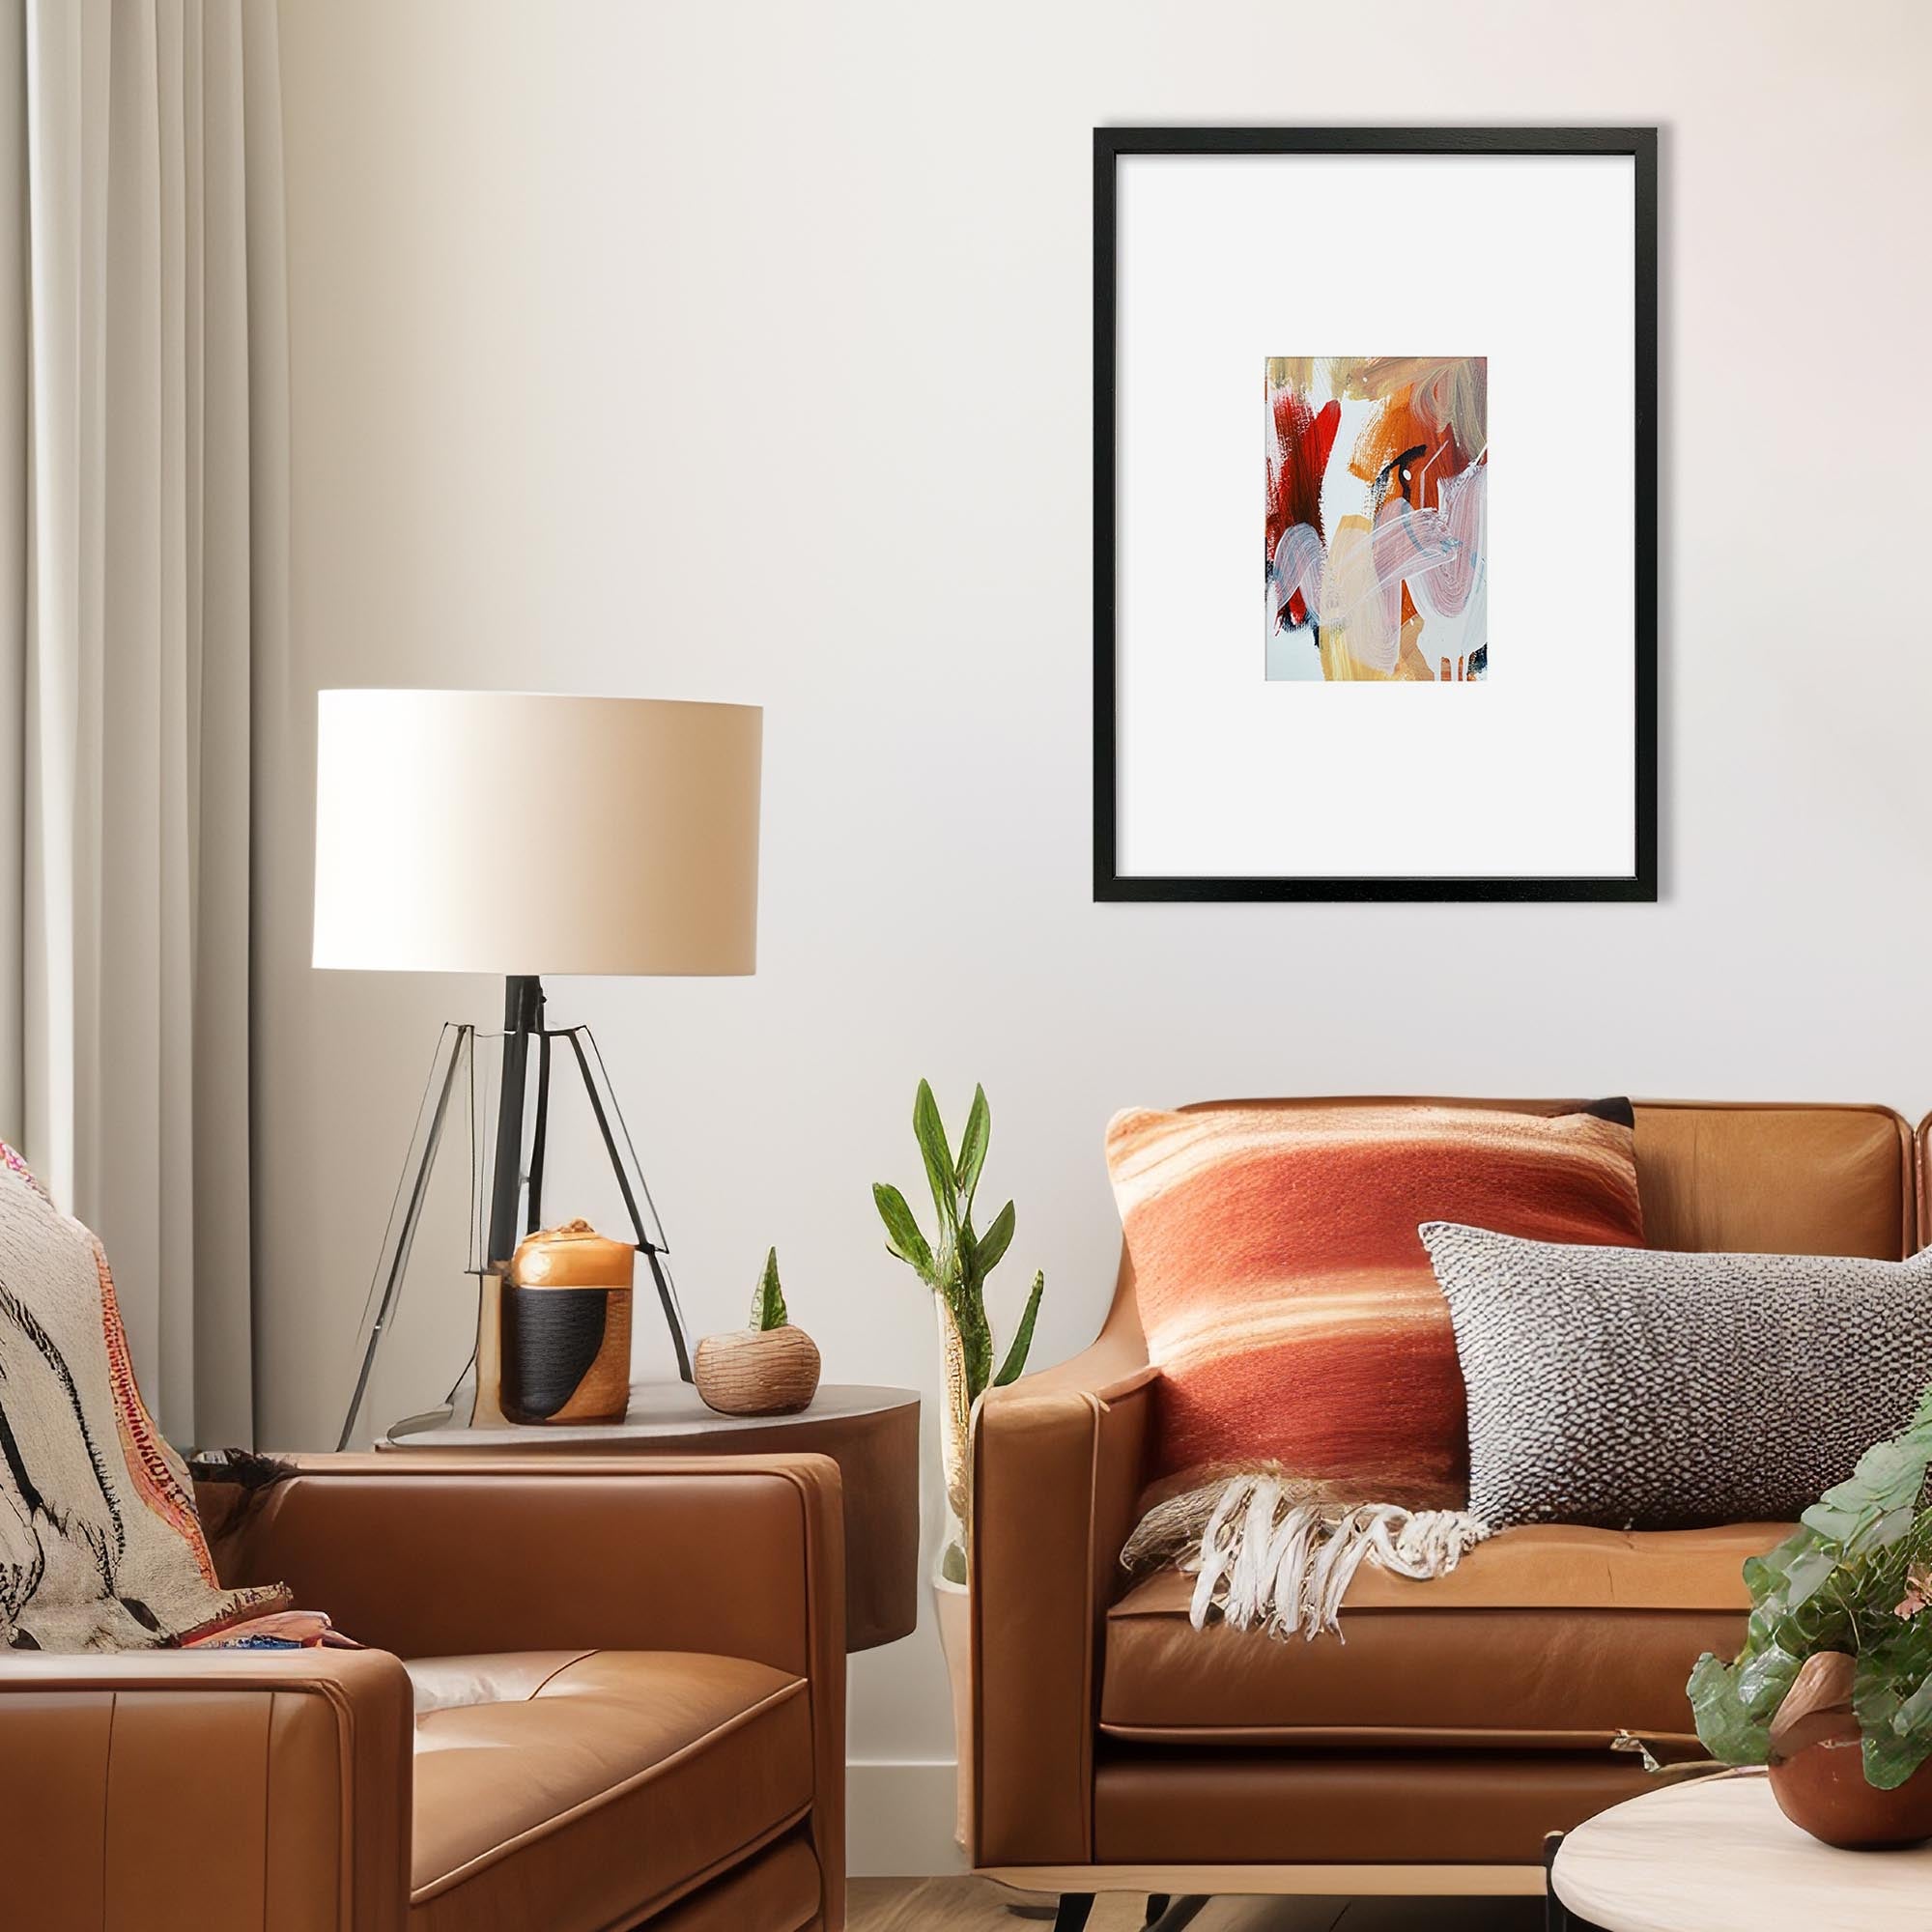 Composition 5 Framed Original Painting-Abstract House